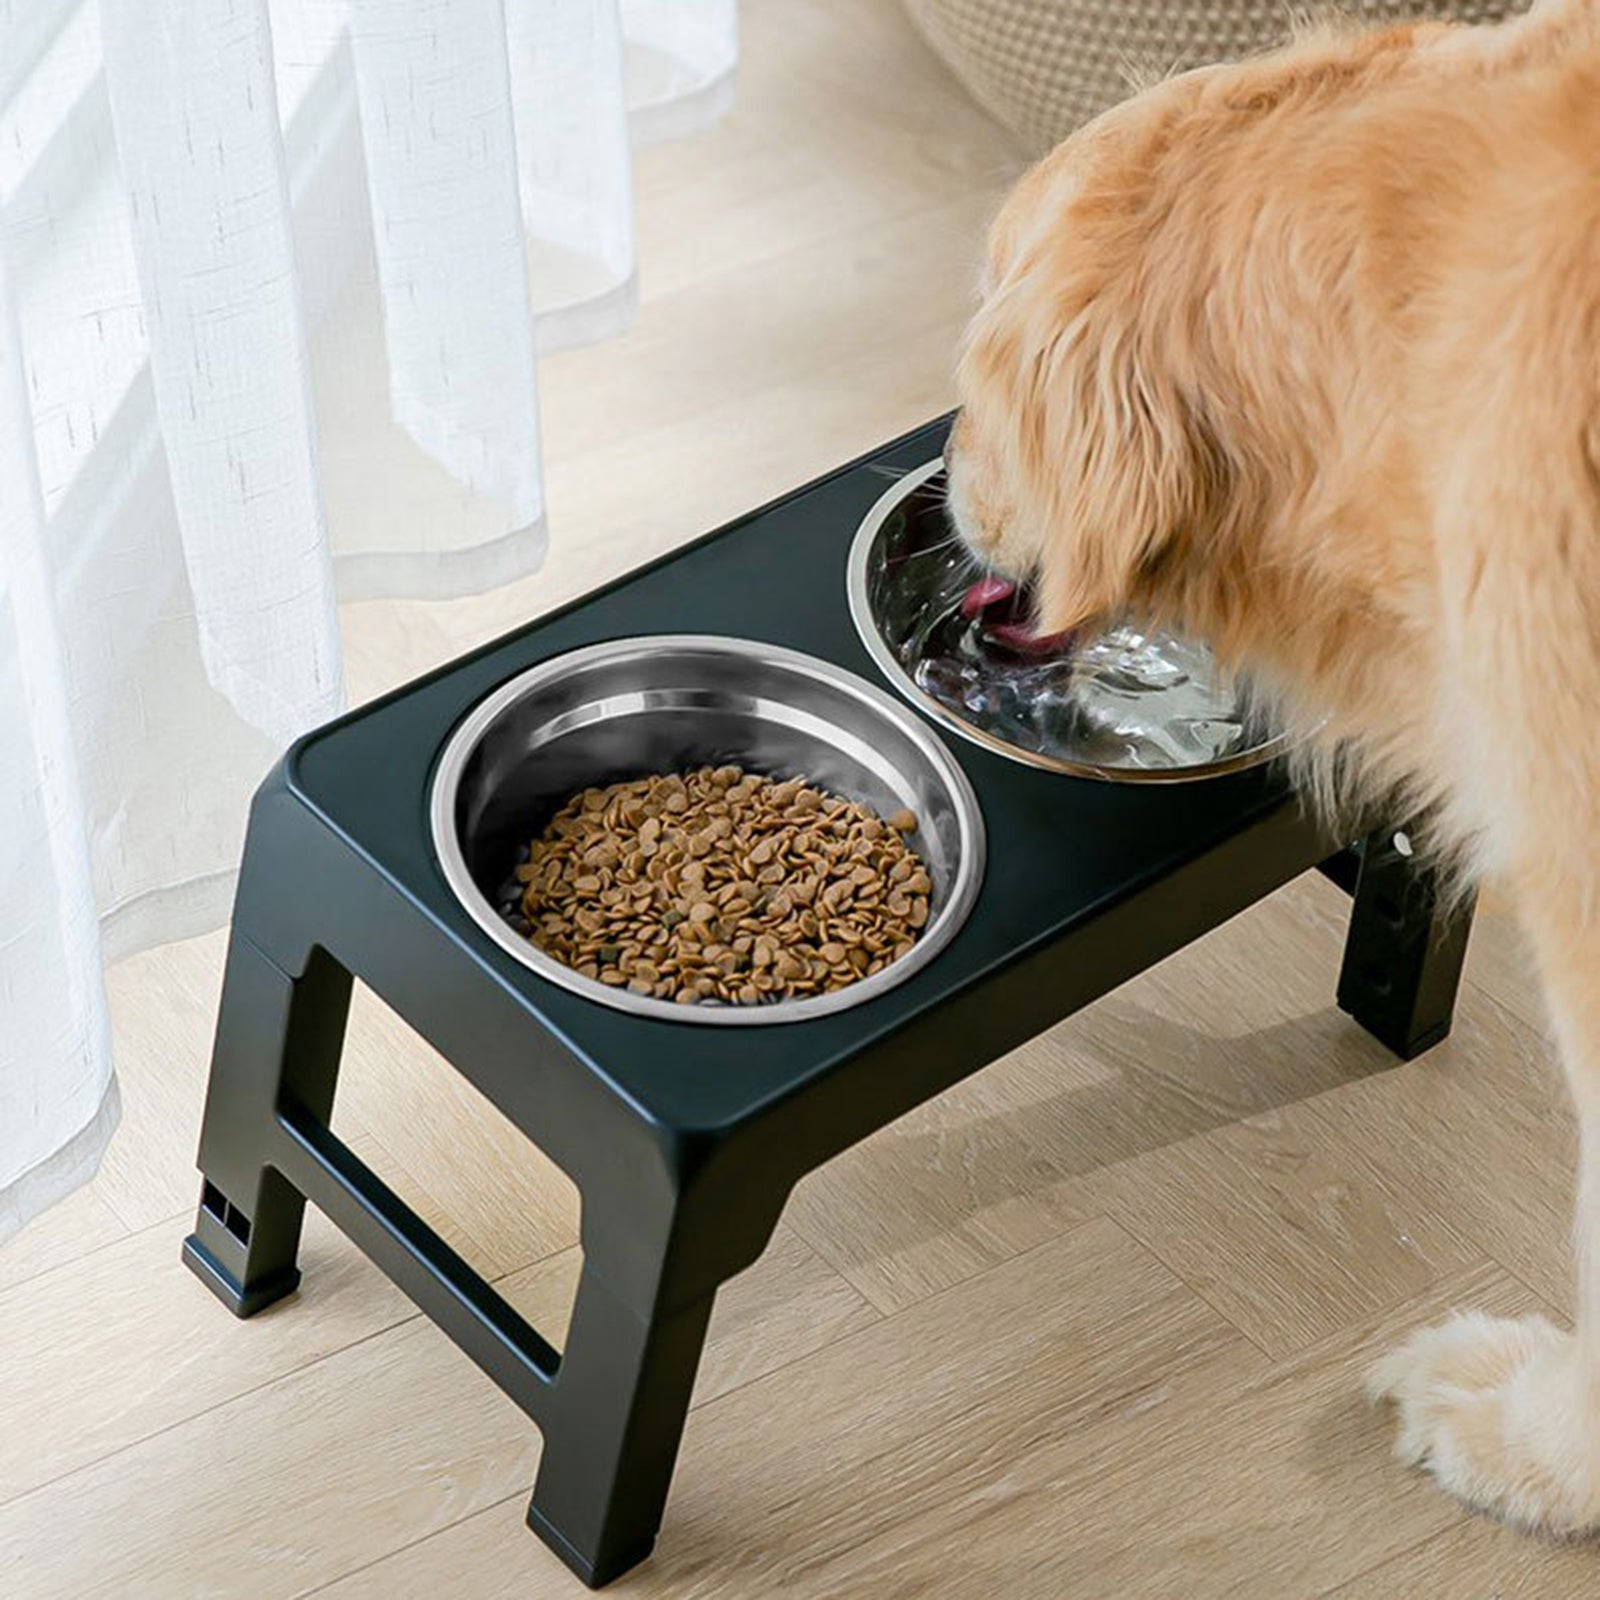 Elevated Dog Bowls Adjustable Raised Dog Bowl Stand with Double Stainless Steel Dog Food Bowls Adjusts to 3 Heights, 7.87”, 9.84”, 11.8 inch